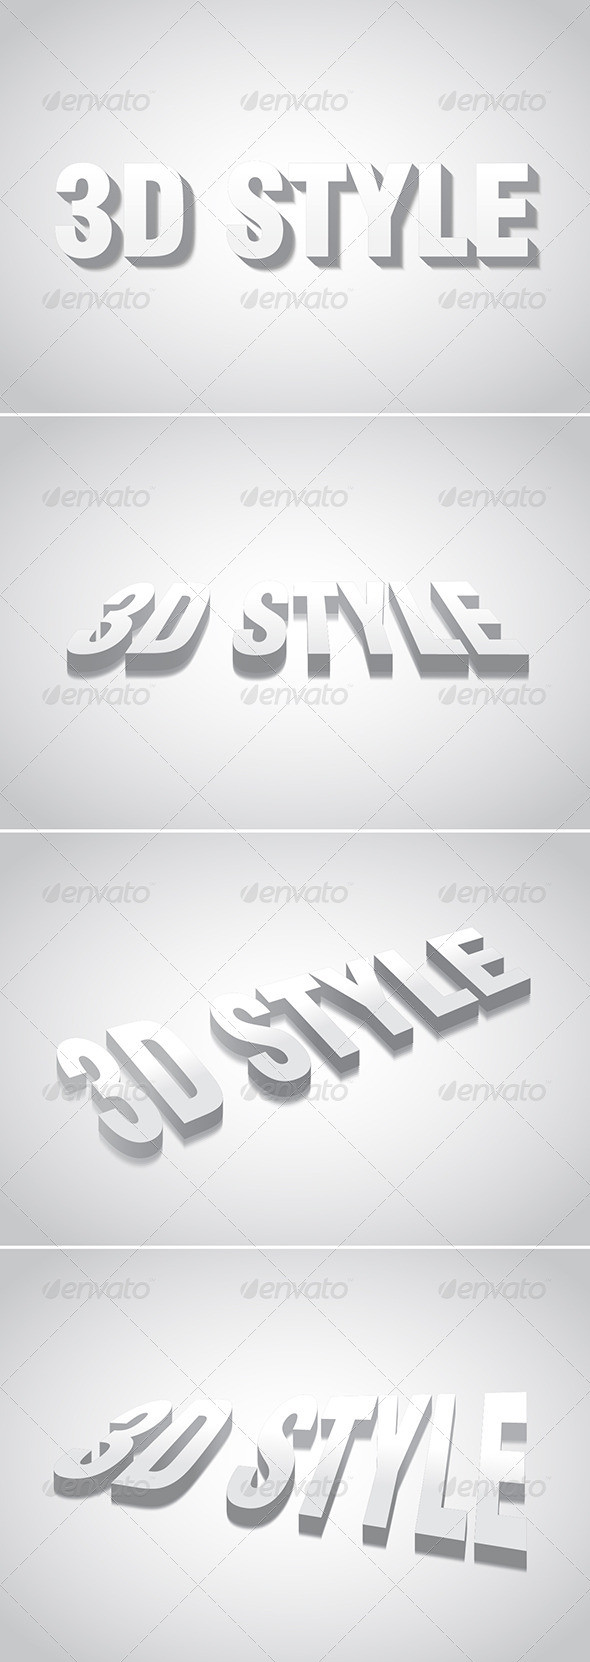 3d vector graphic styles